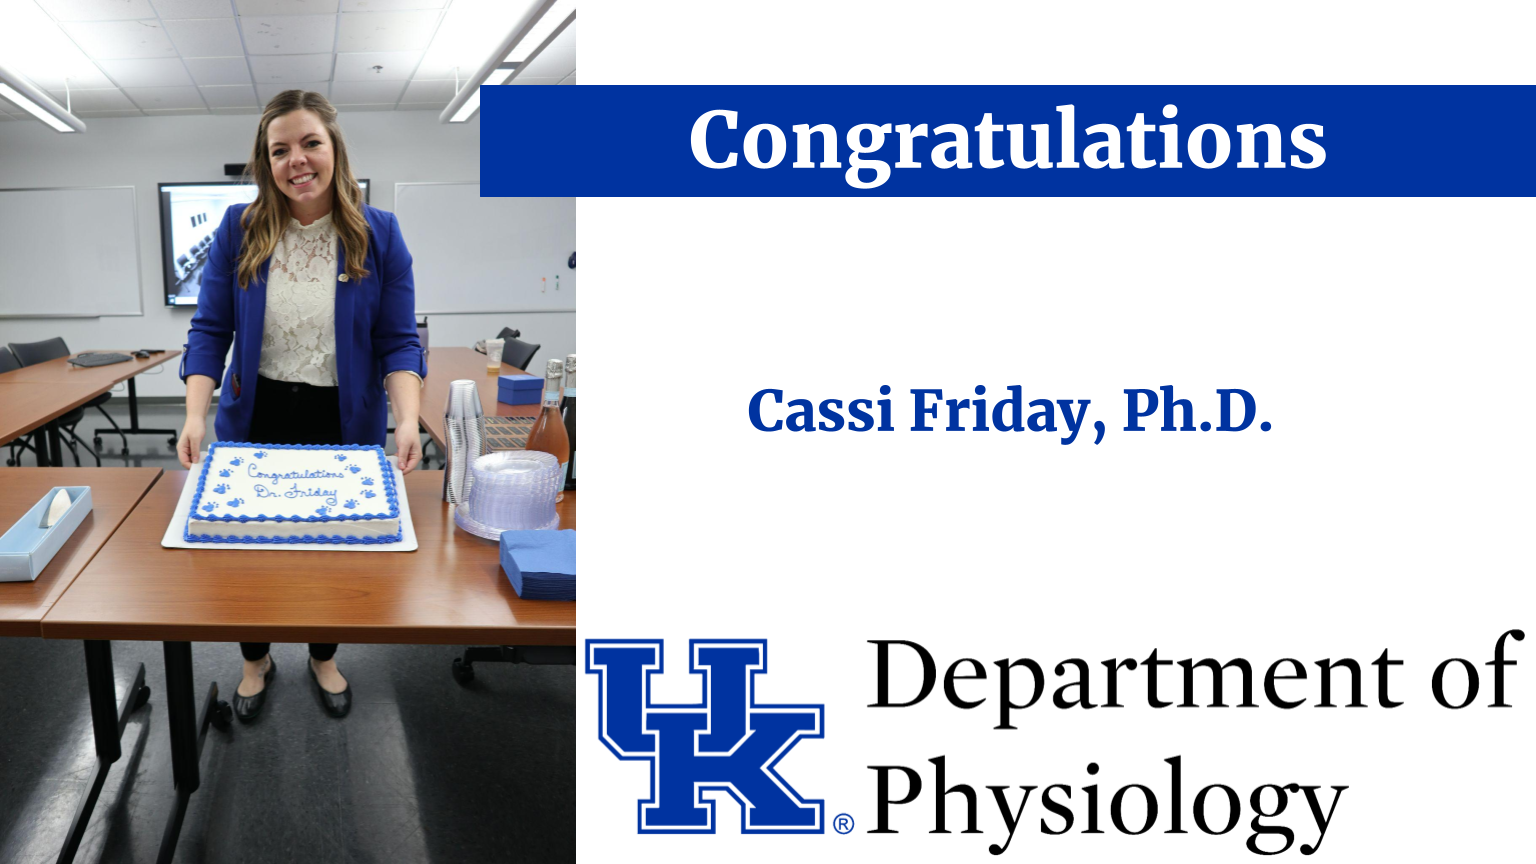 Cassi Friday holding a cake that says, "Congratulations Dr Friday"